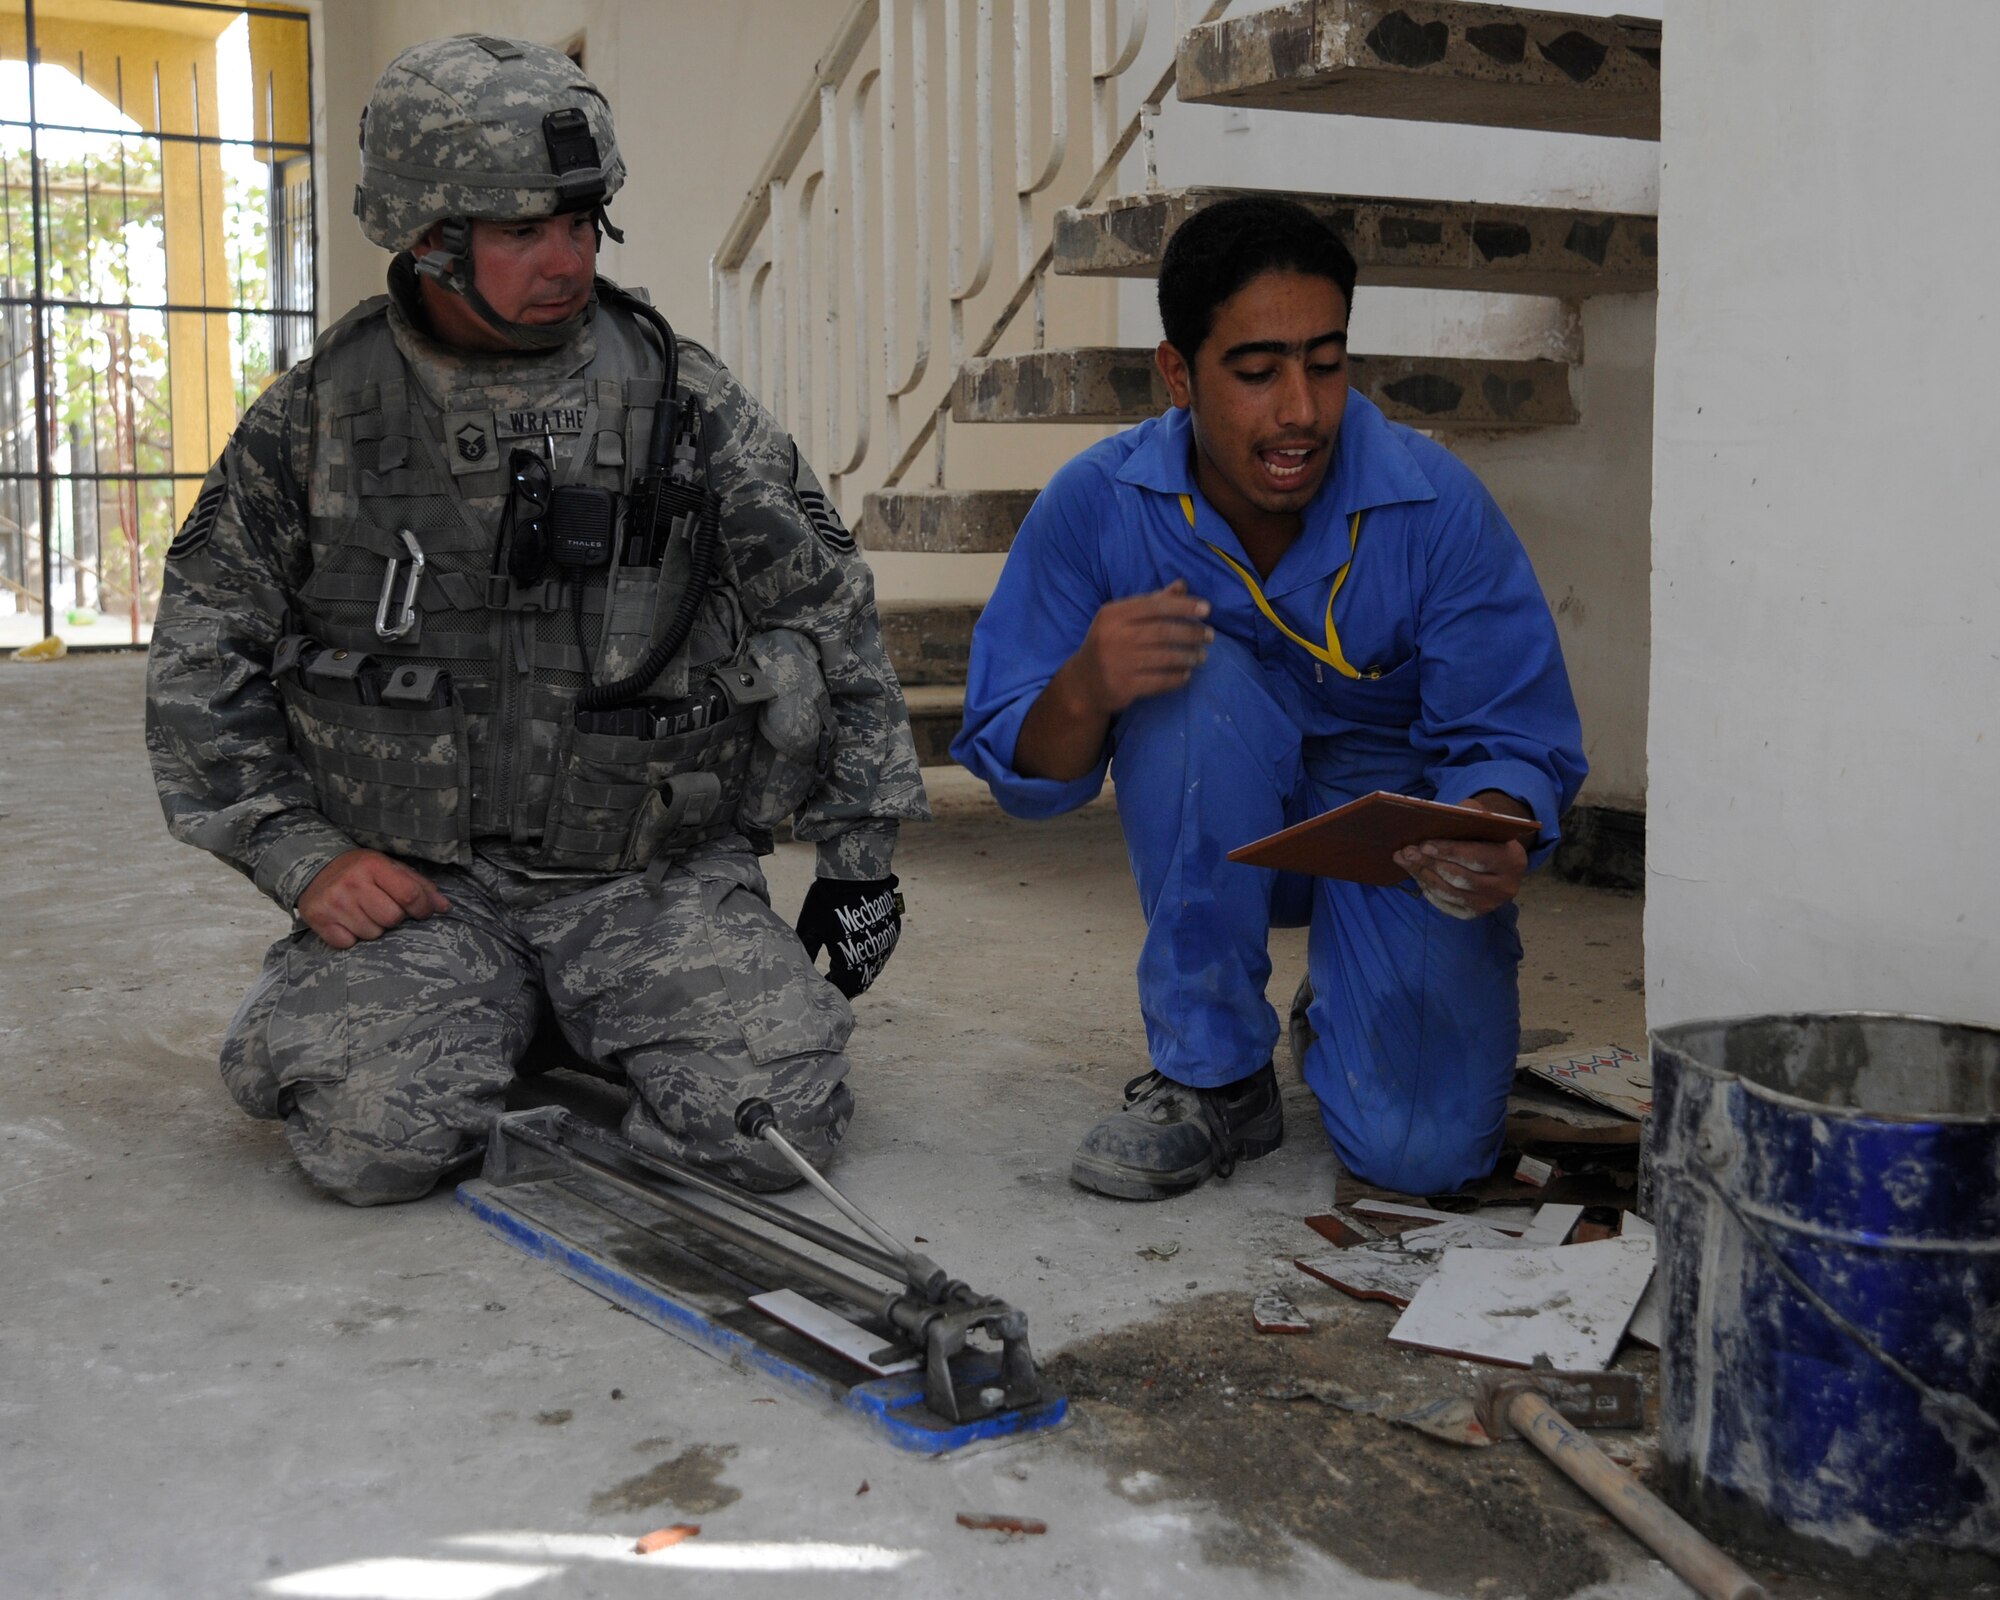 HAWR RAJAB, IRAQ -- U.S. Air Force Master Sgt. Patrick Wrathell, 1st Sgt. non-commissioned officer in charge of downtown operations with 557th Expeditionary RED HORSE squadron, shows an Iraqi student worker how to cut tile at Hawr Rajab, Iraq on Aug. 27. Wrathell, a East Tawas, Mich. native, is deployed from 823rd RED HORSE squadron, Hurlburt Field, Fla. (U.S. Air Force photo/Staff Sgt. Paul Villanueva II)